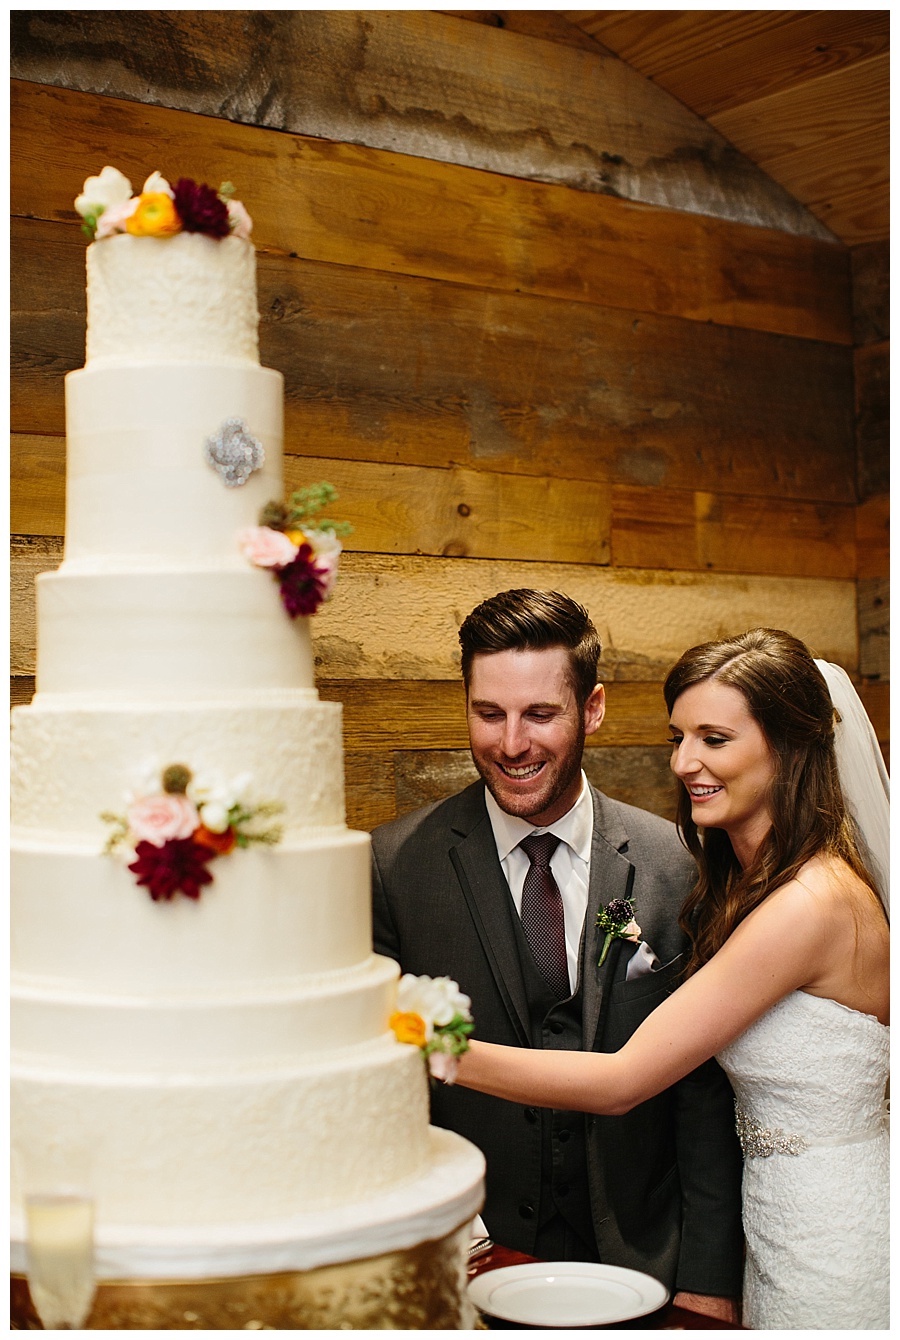 Elegant Hill Country Wedding  bride and groom cutting cake